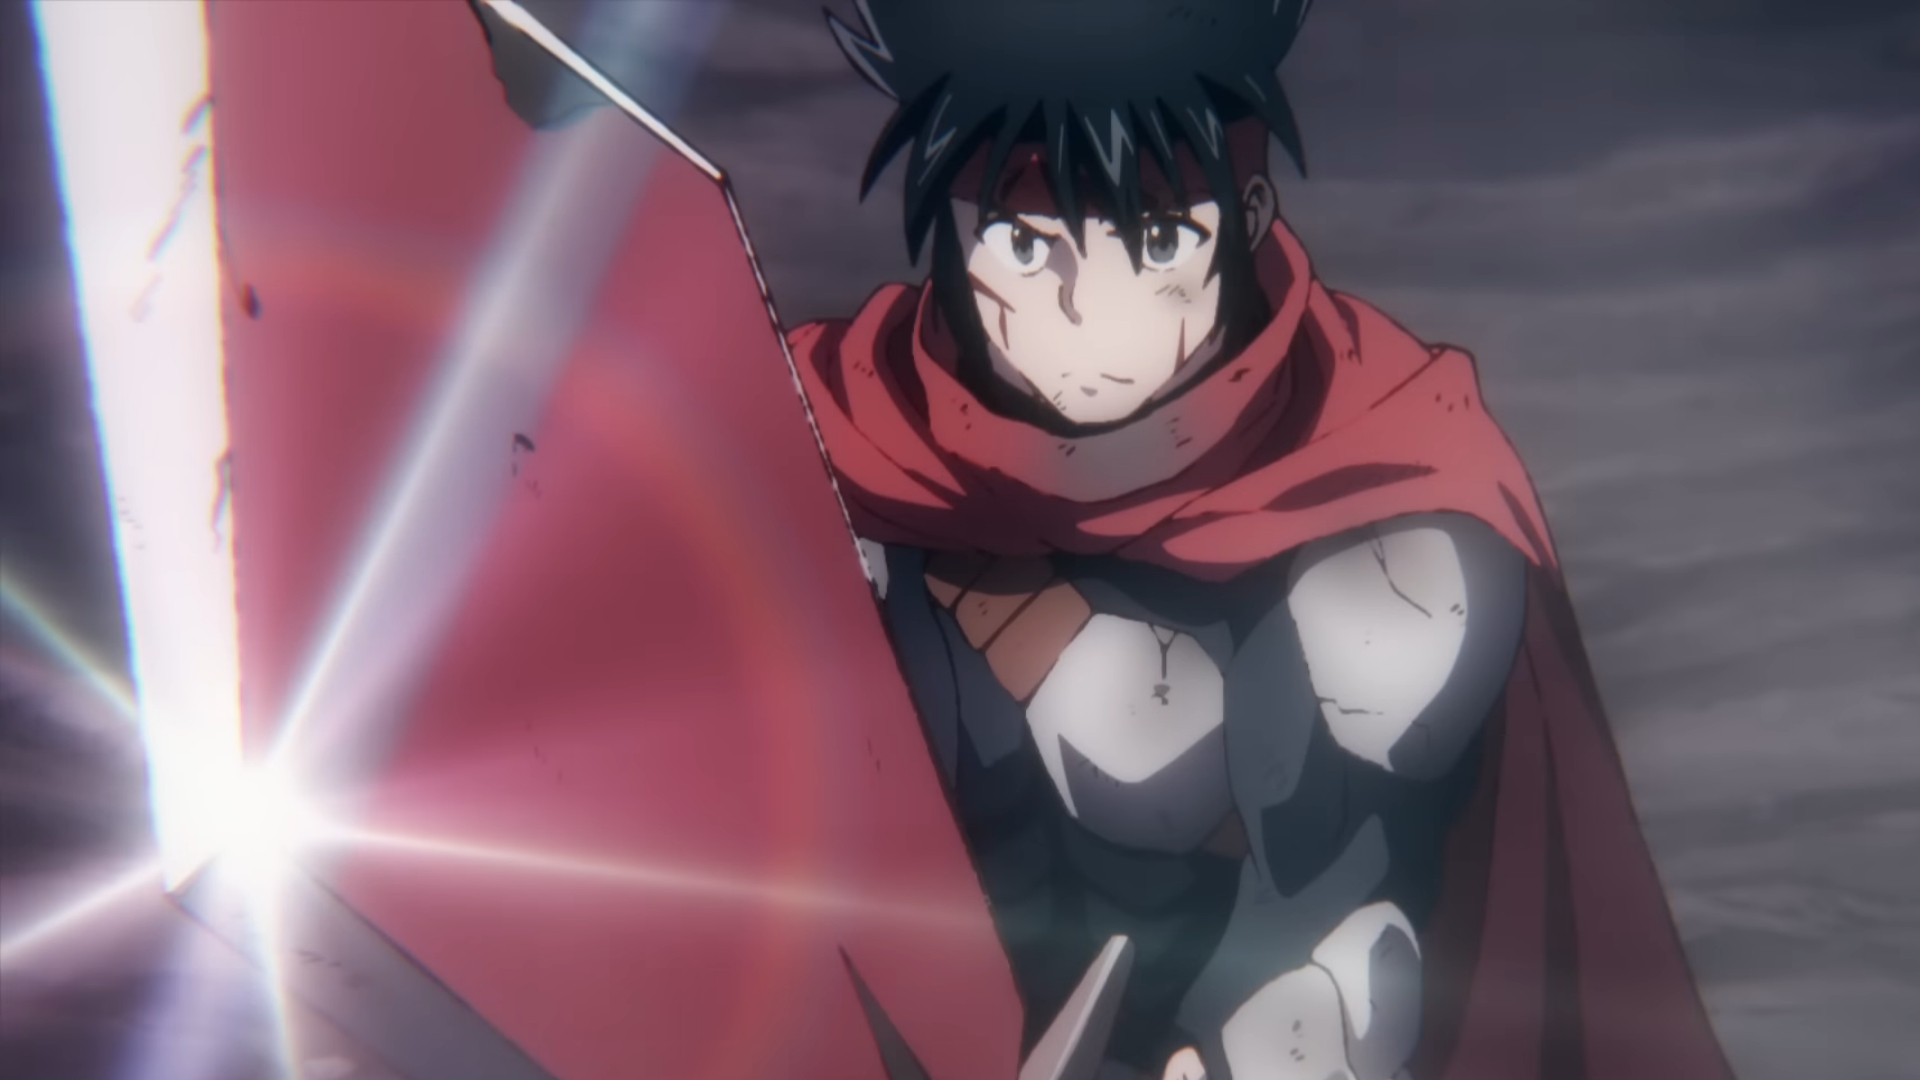 Level 1 Demon Lord and One Room Hero Anime Gets New Visual and Trailer,  2023 Premiere - Anime Corner